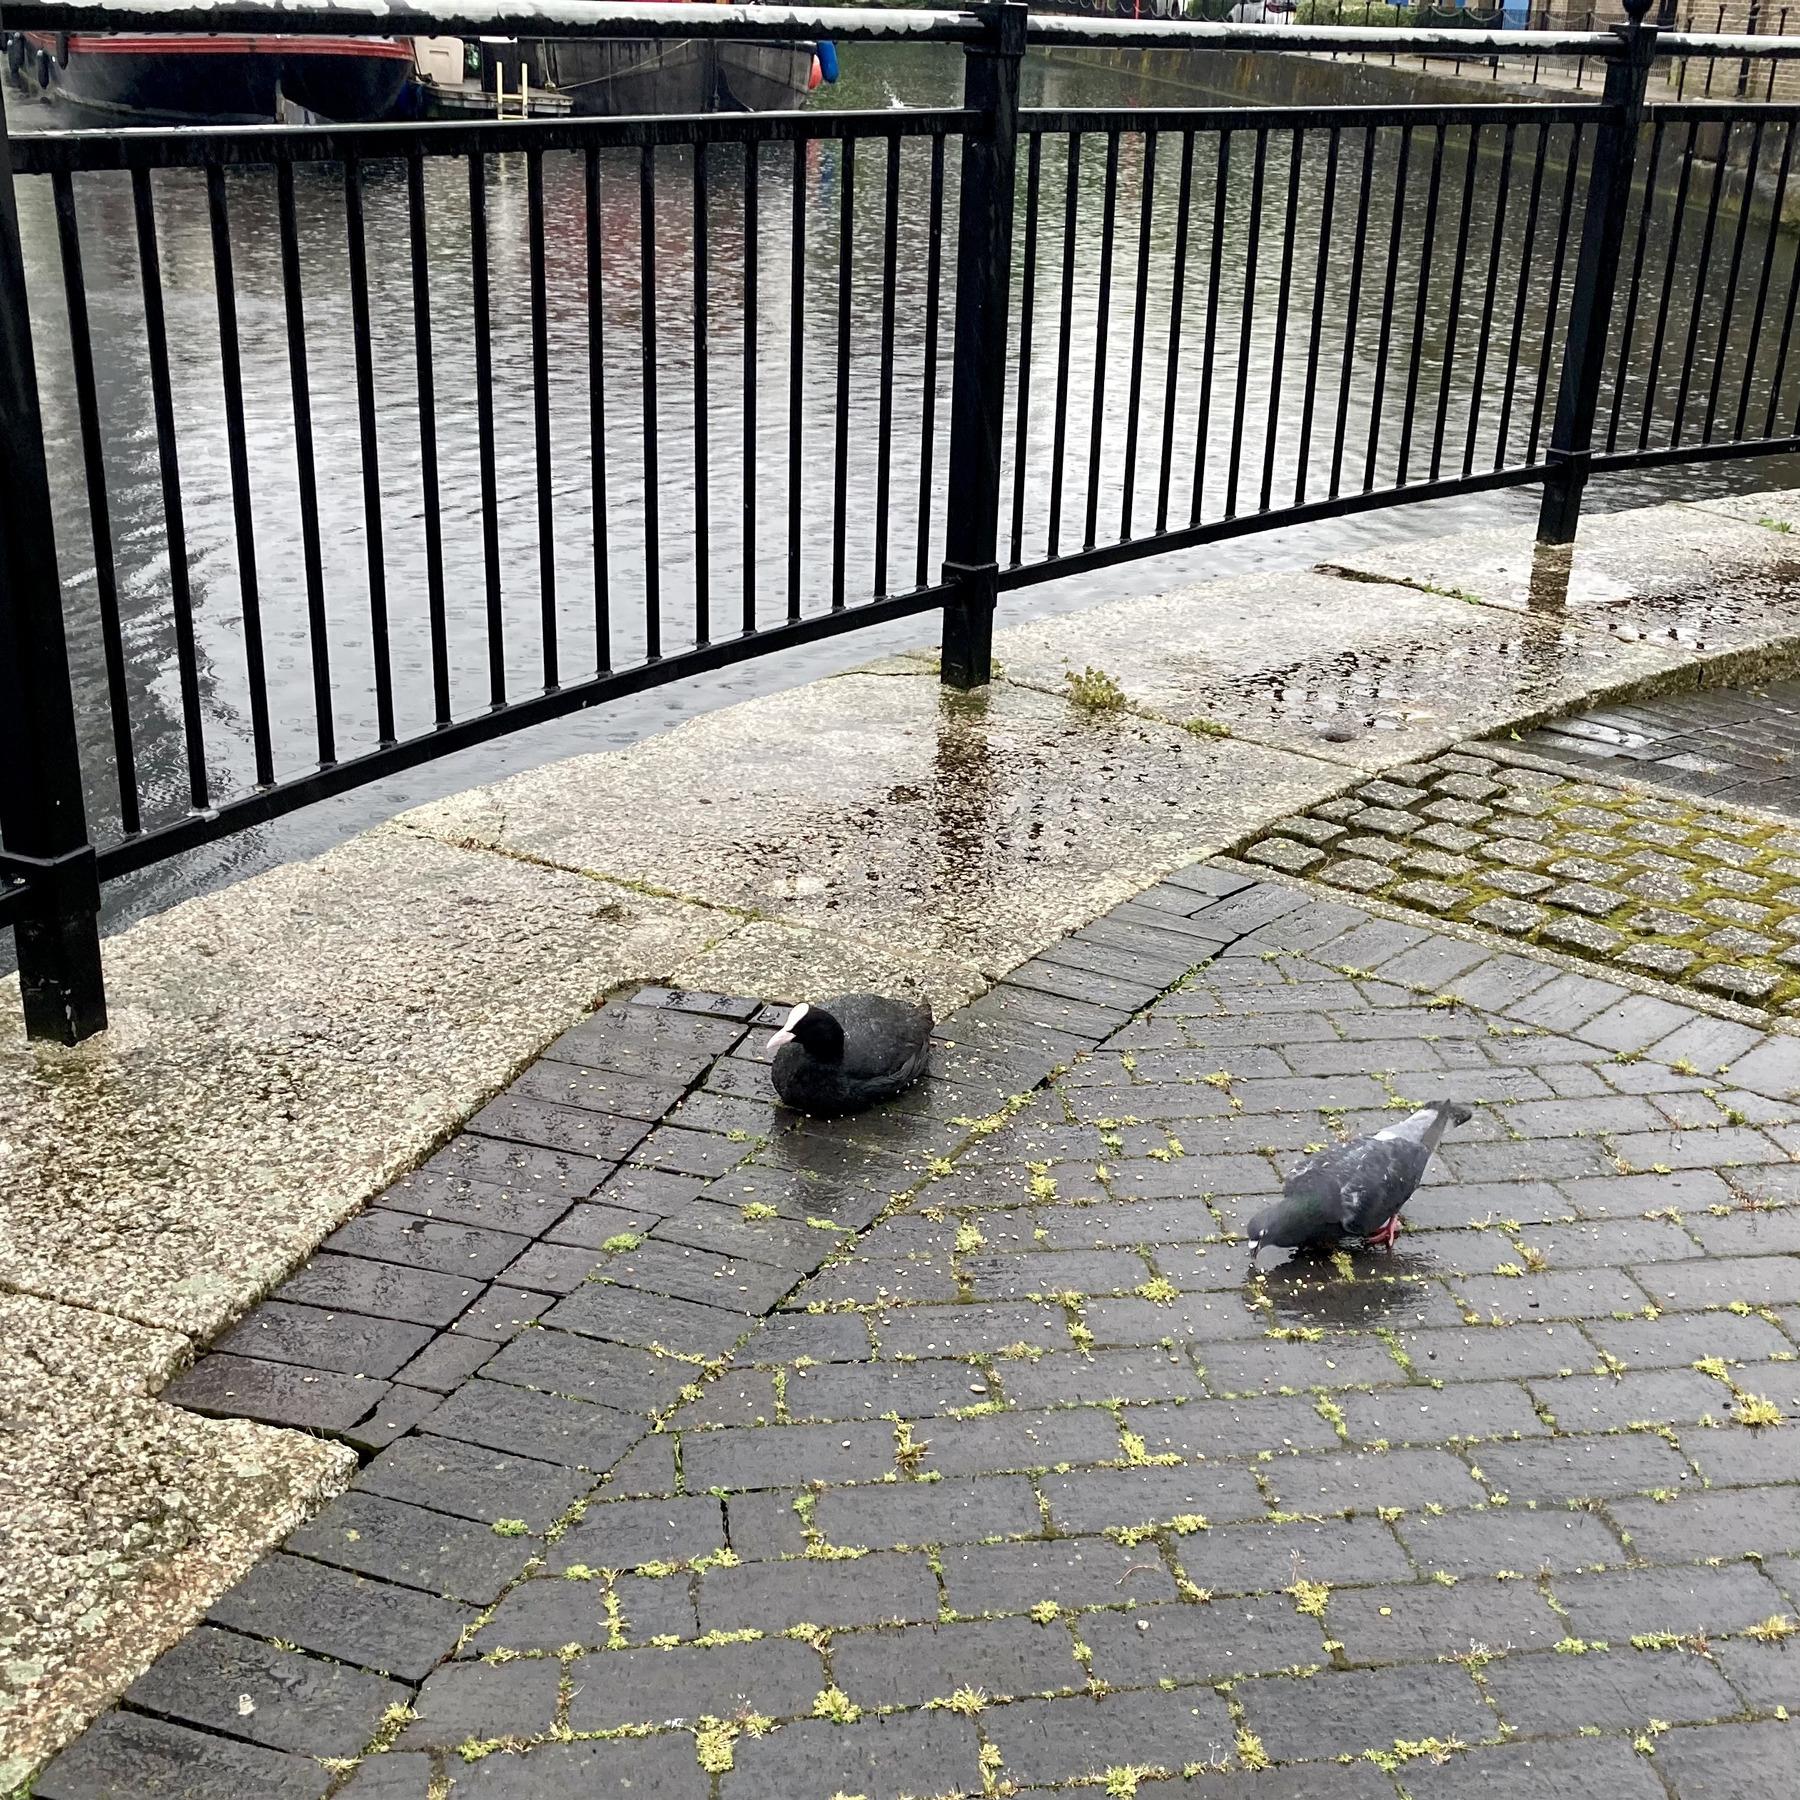 A coots sits on the pavement beside a pigeon who is eating seeds, there's a metal fence in the background, and the water of a marina